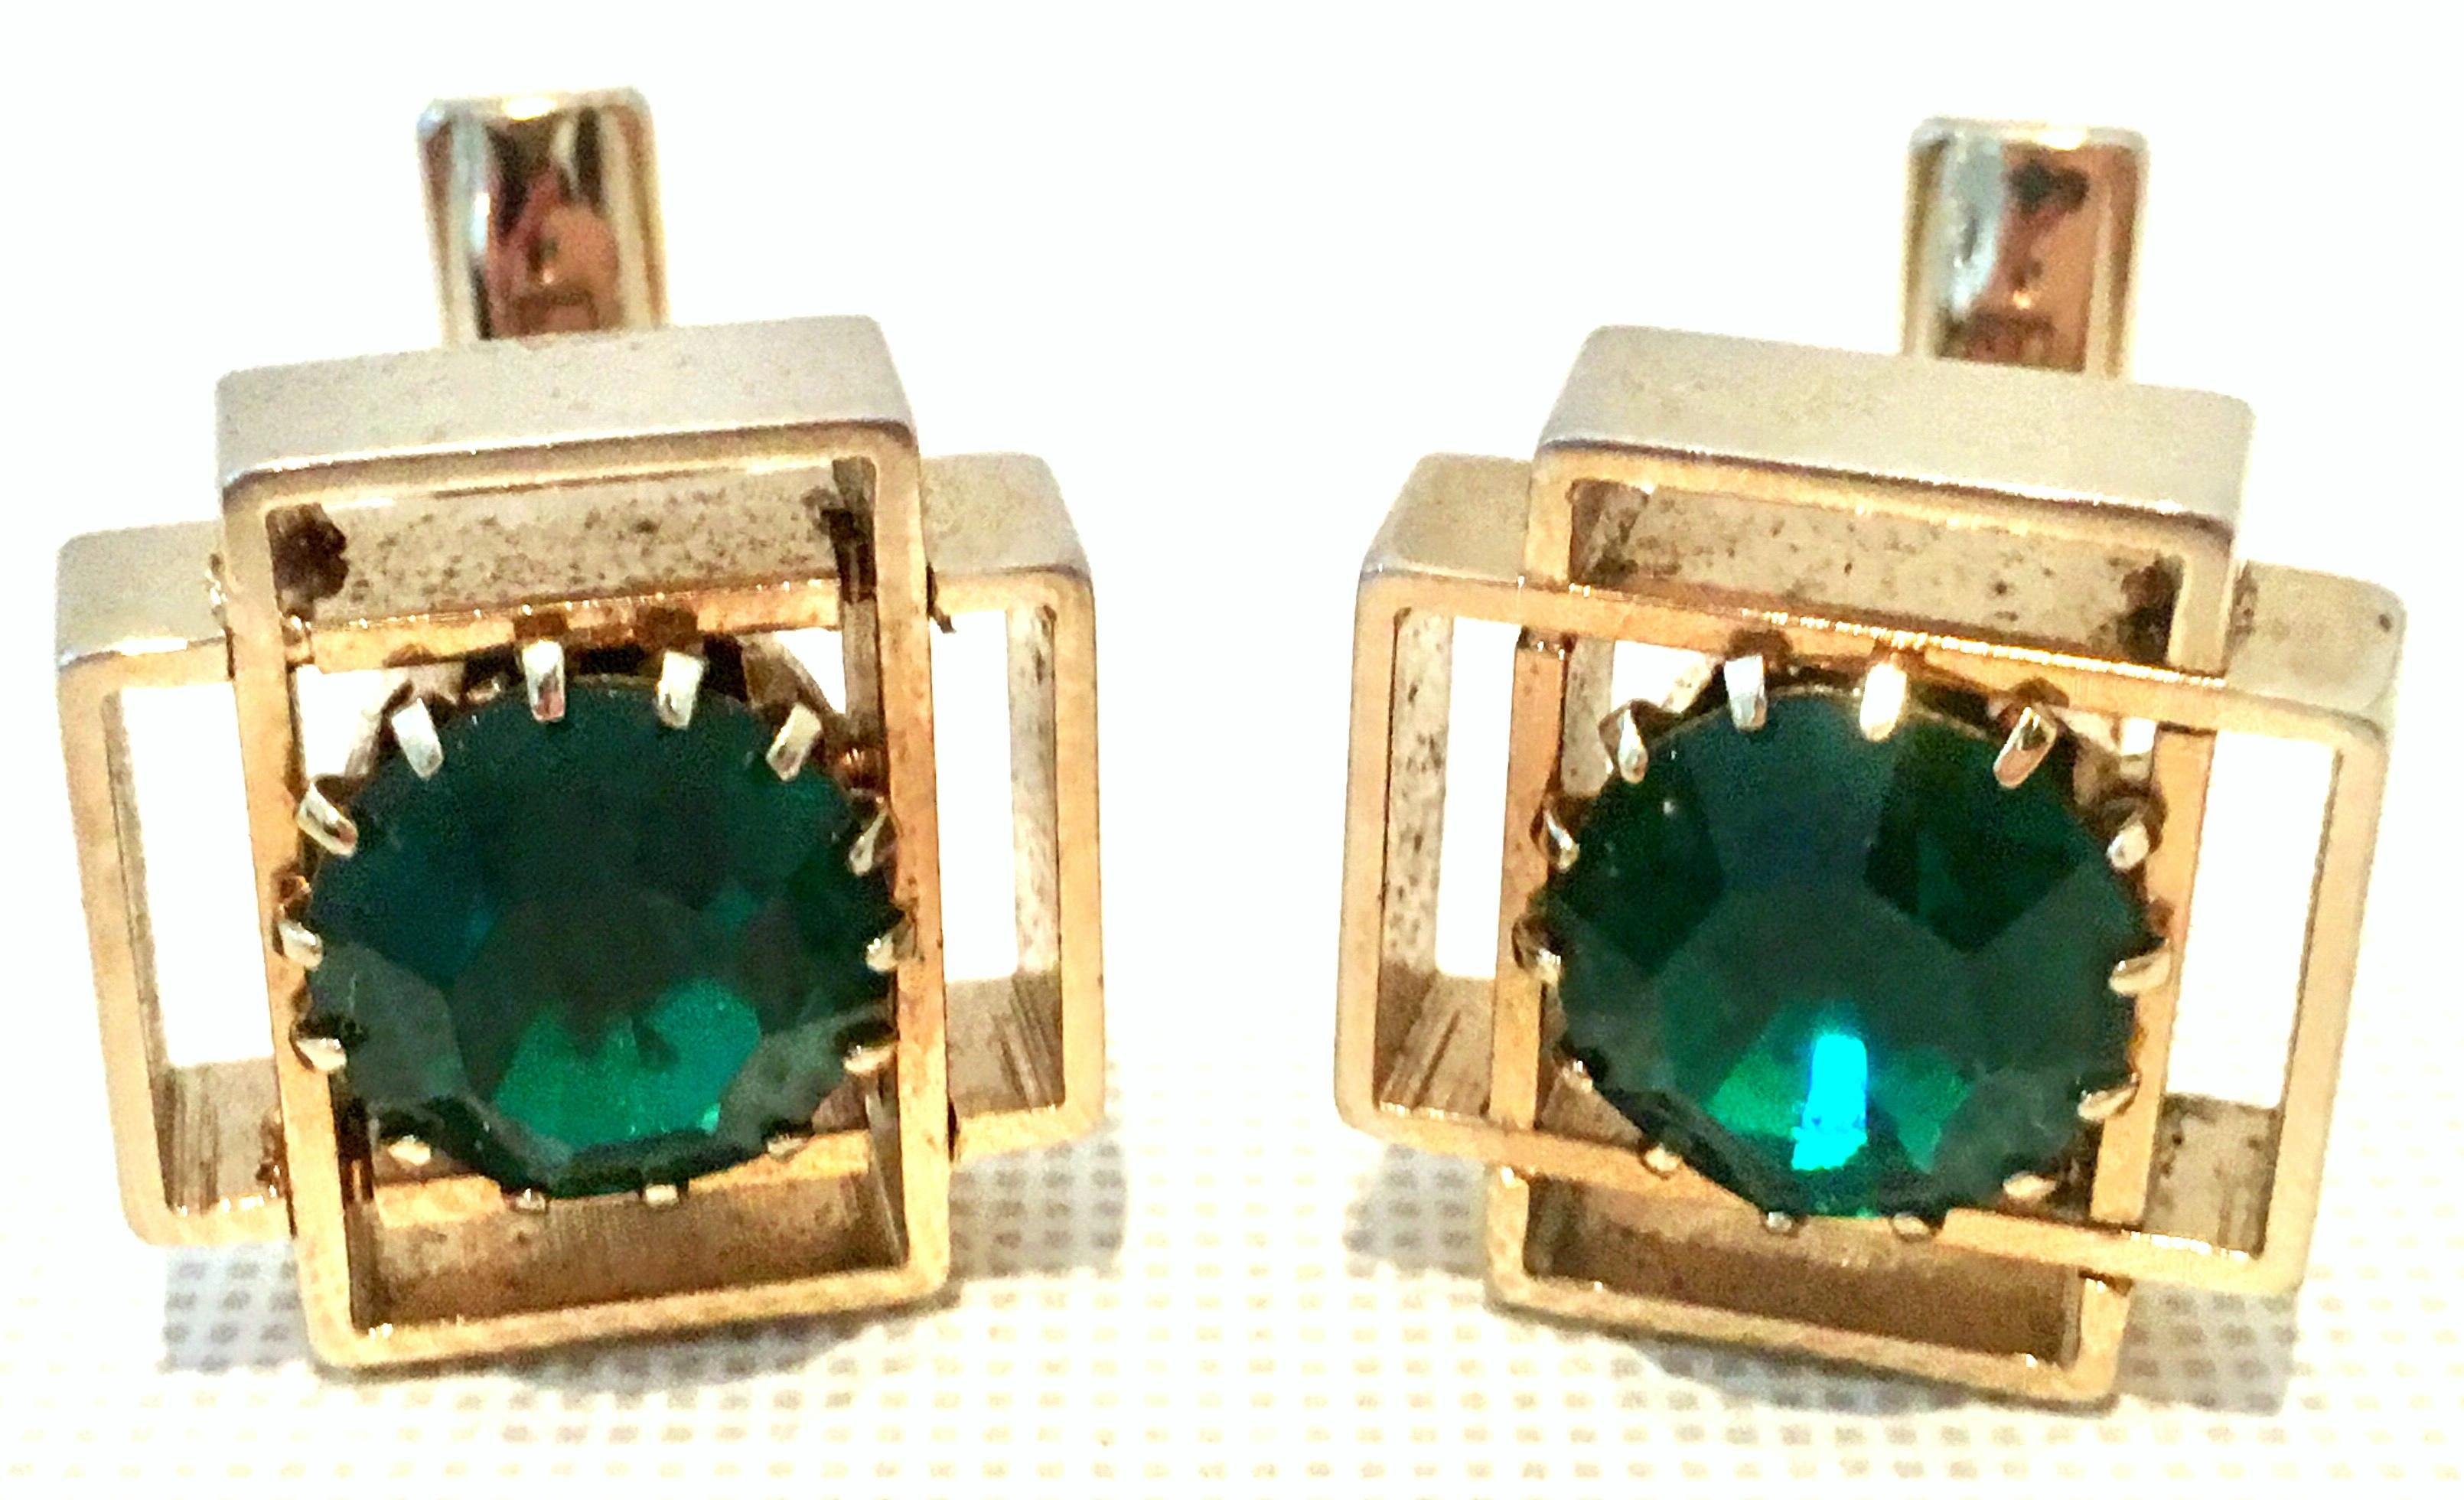 20th Century Pair Of Gold Plate & Austrian Crystal Geometric Cufflinks. Features a gold plate geometric shape with prong set cut and faceted brilliant emerald Austrian crystal stone. Each piece is signed on the underside with a patent number.